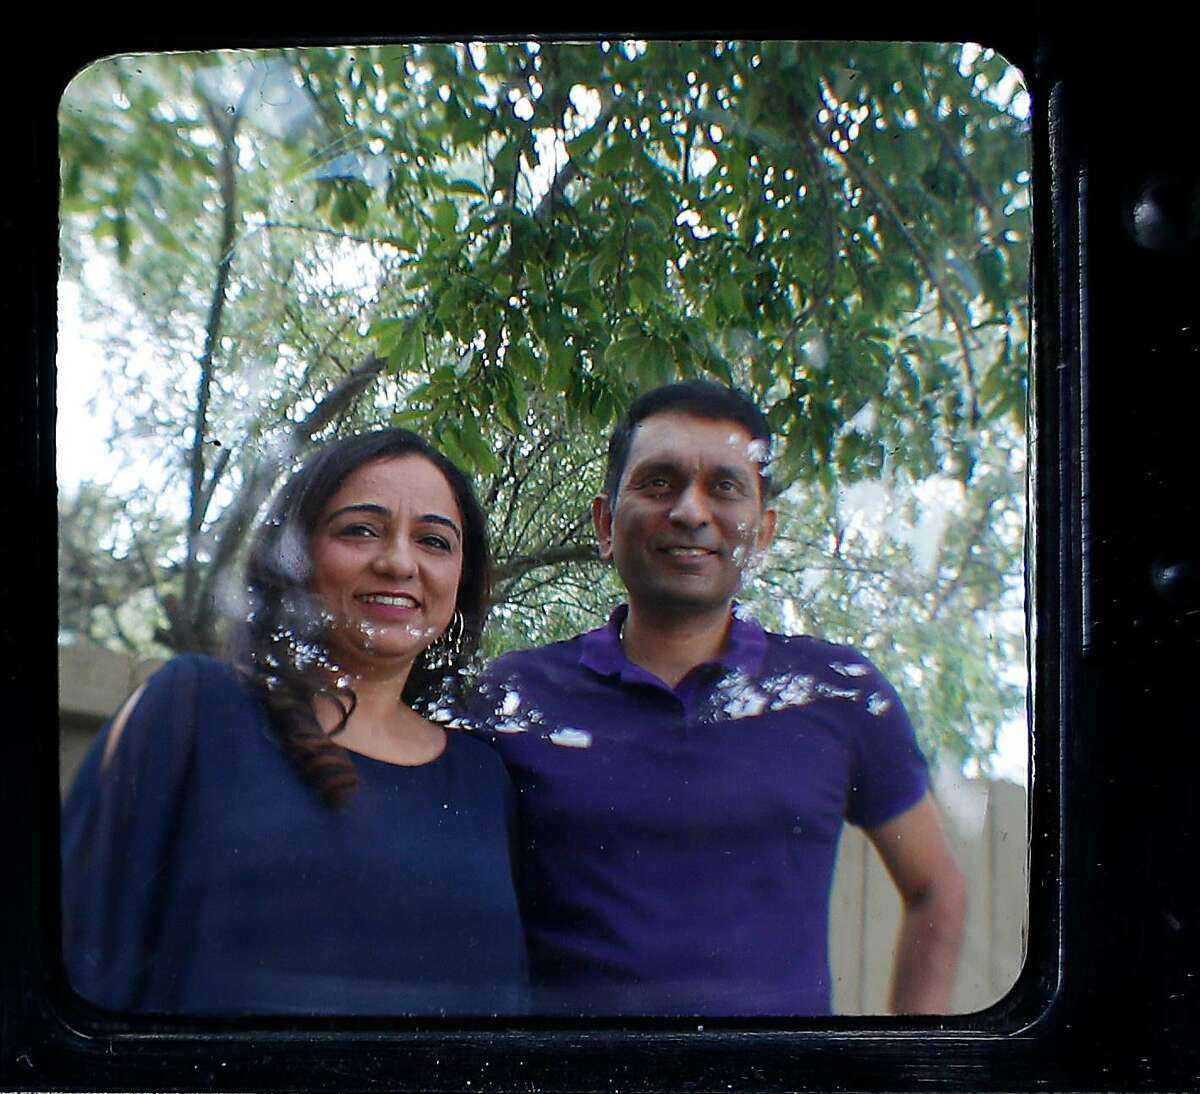 Richa (left) and Rahul Kapoor, who were brought together through an arranged marriage, at their home in San Jose.